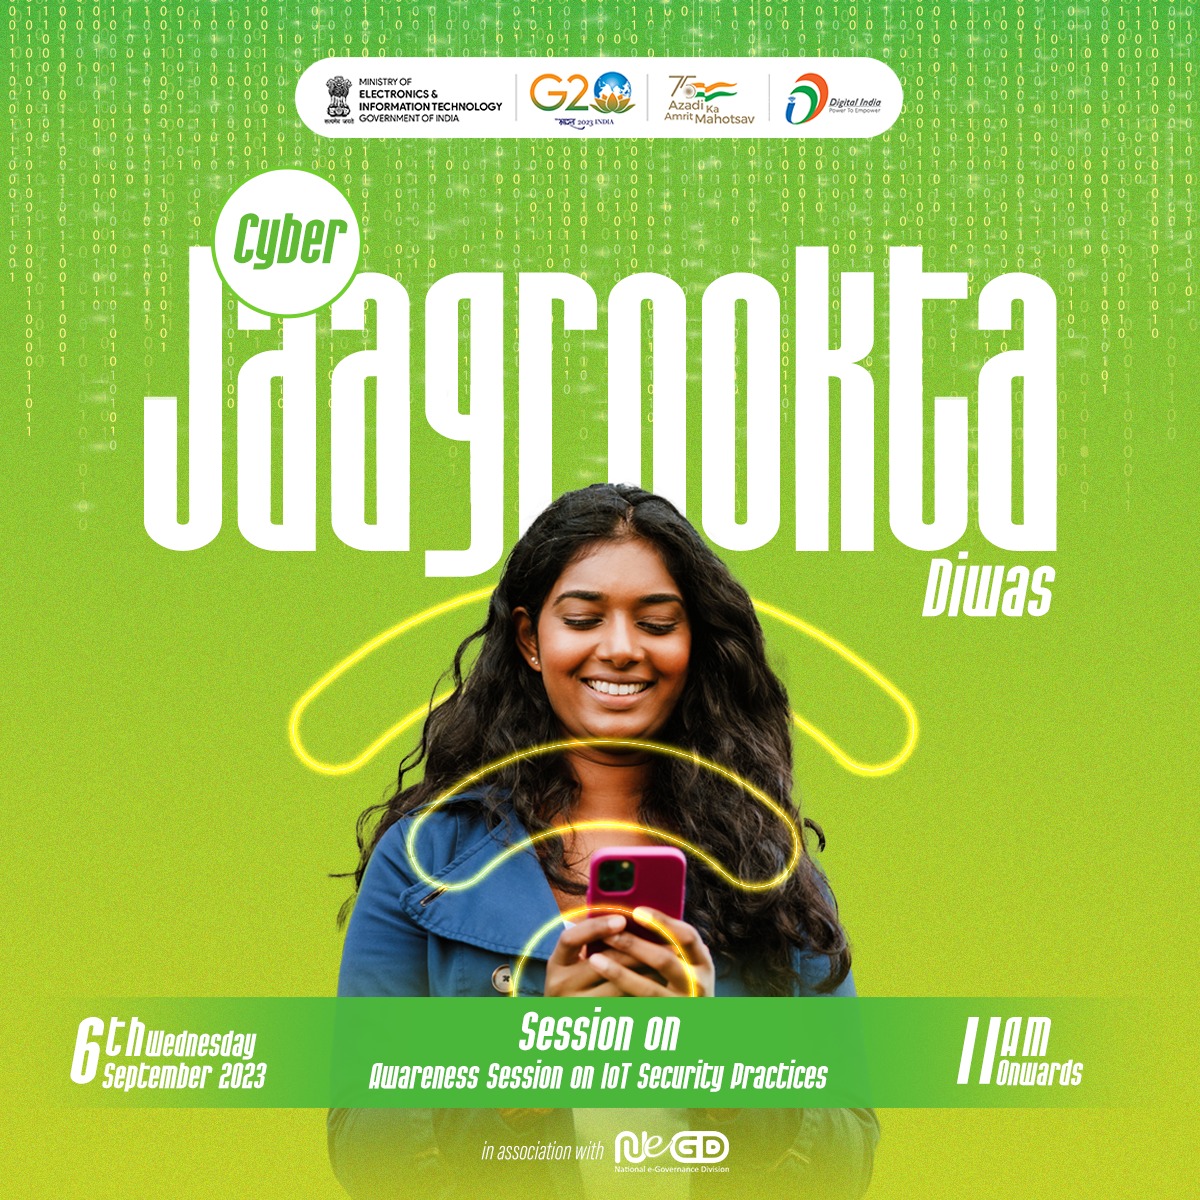 #CyberJagrooktaDiwas  
Awareness Session on IoT Security Practices  

🗓 Wednesday, September 6, 2023 (Tomorrow)
⏲️11:00 AM  

#DigitalIndia #CyberSecurity #G20DEWG